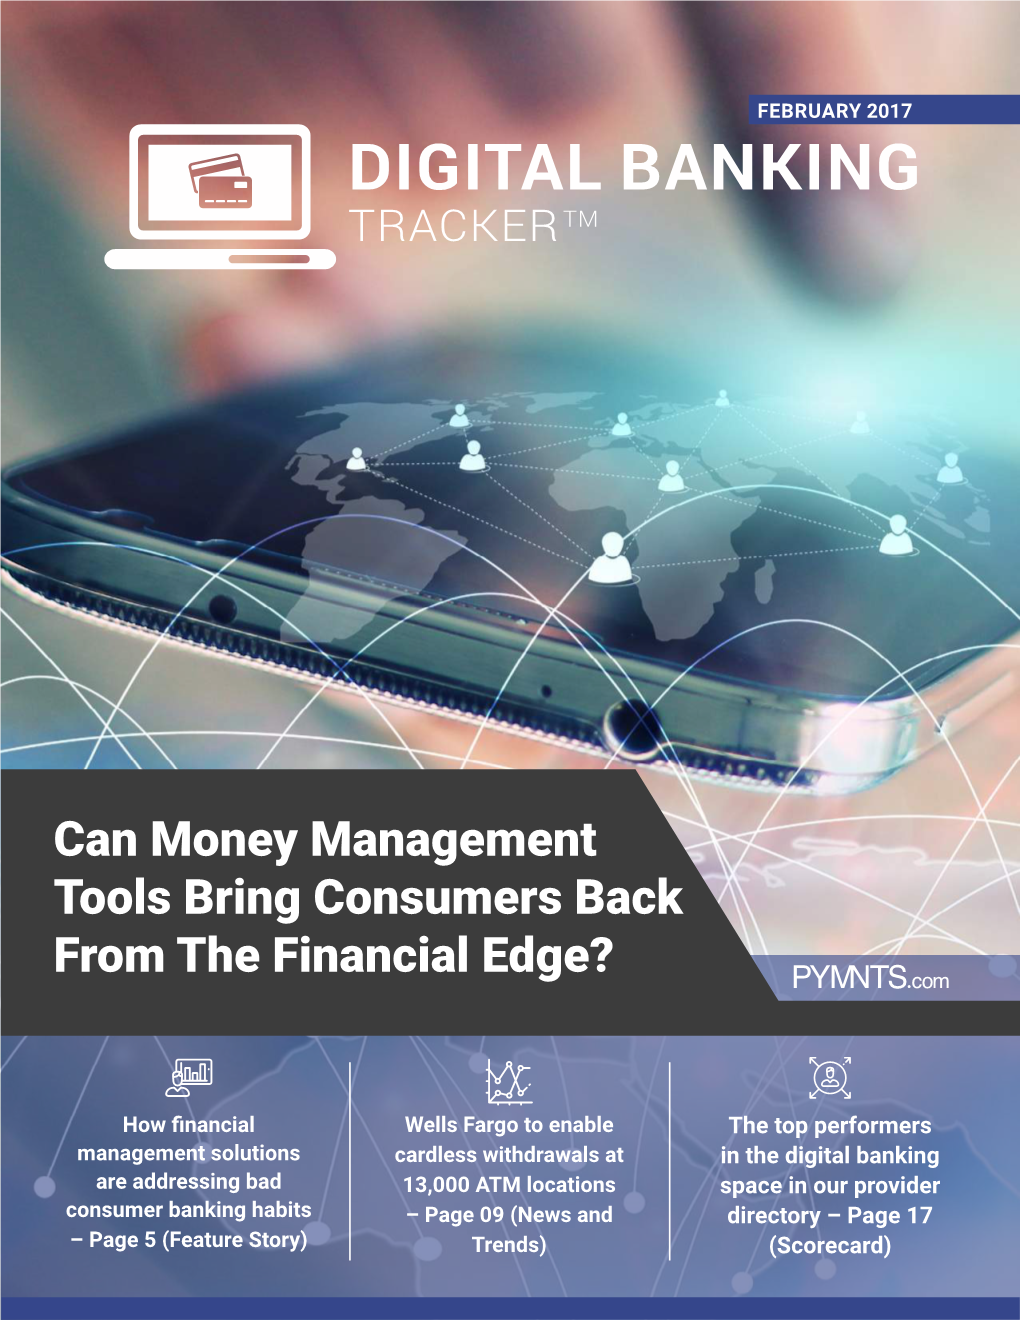 Can Money Management Tools Bring Consumers Back from the Financial Edge?